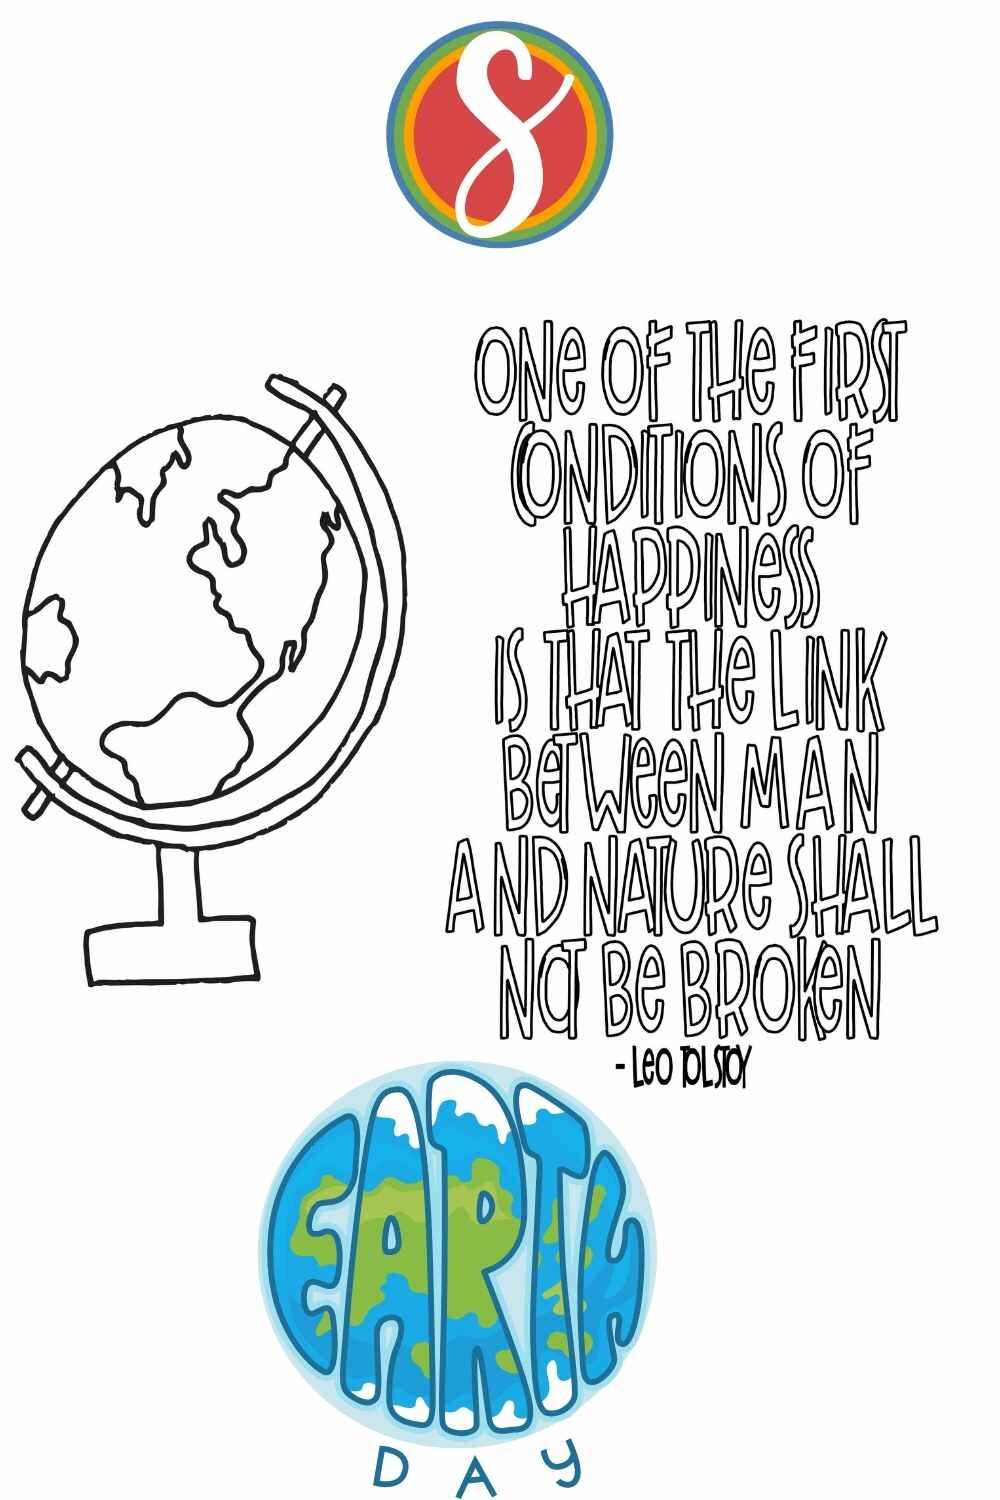 tolstoy quote globe earth day .jpg